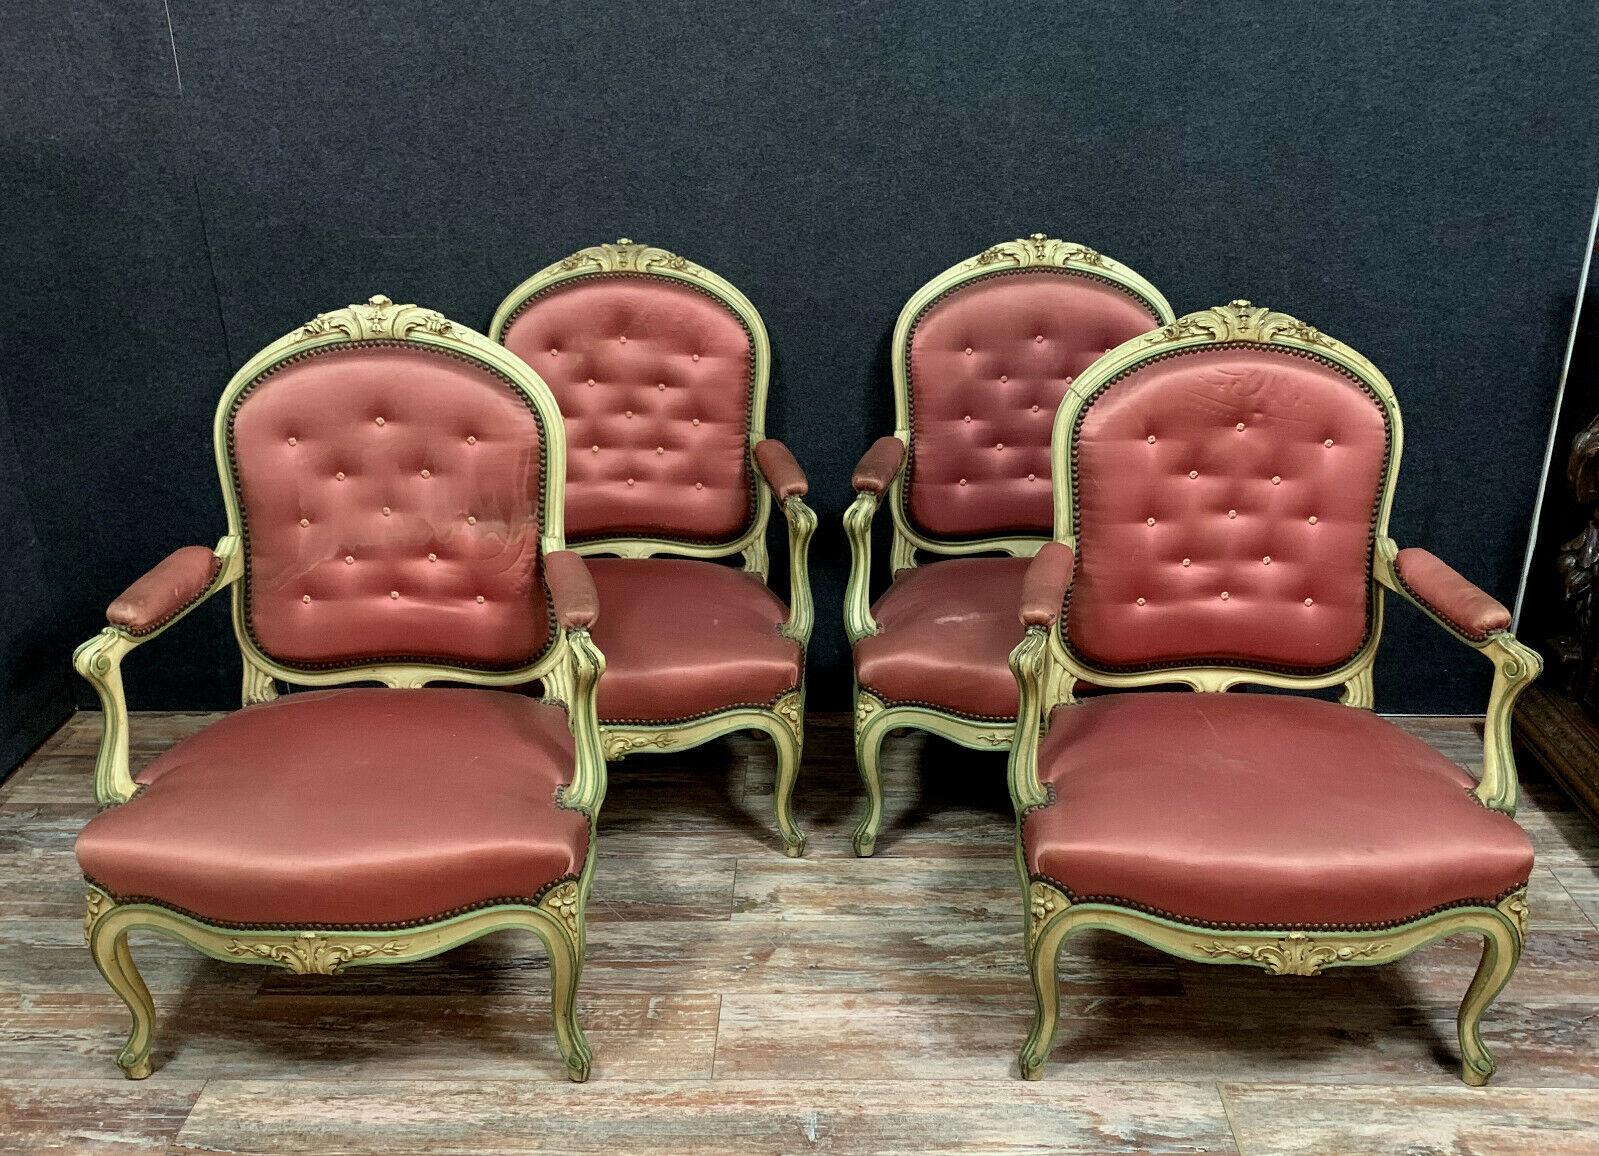 Mid-19th Century Louis XV Lacquered Wood Salon Furniture Set with 4 Armchairs and 2 Chairs -1X01 For Sale